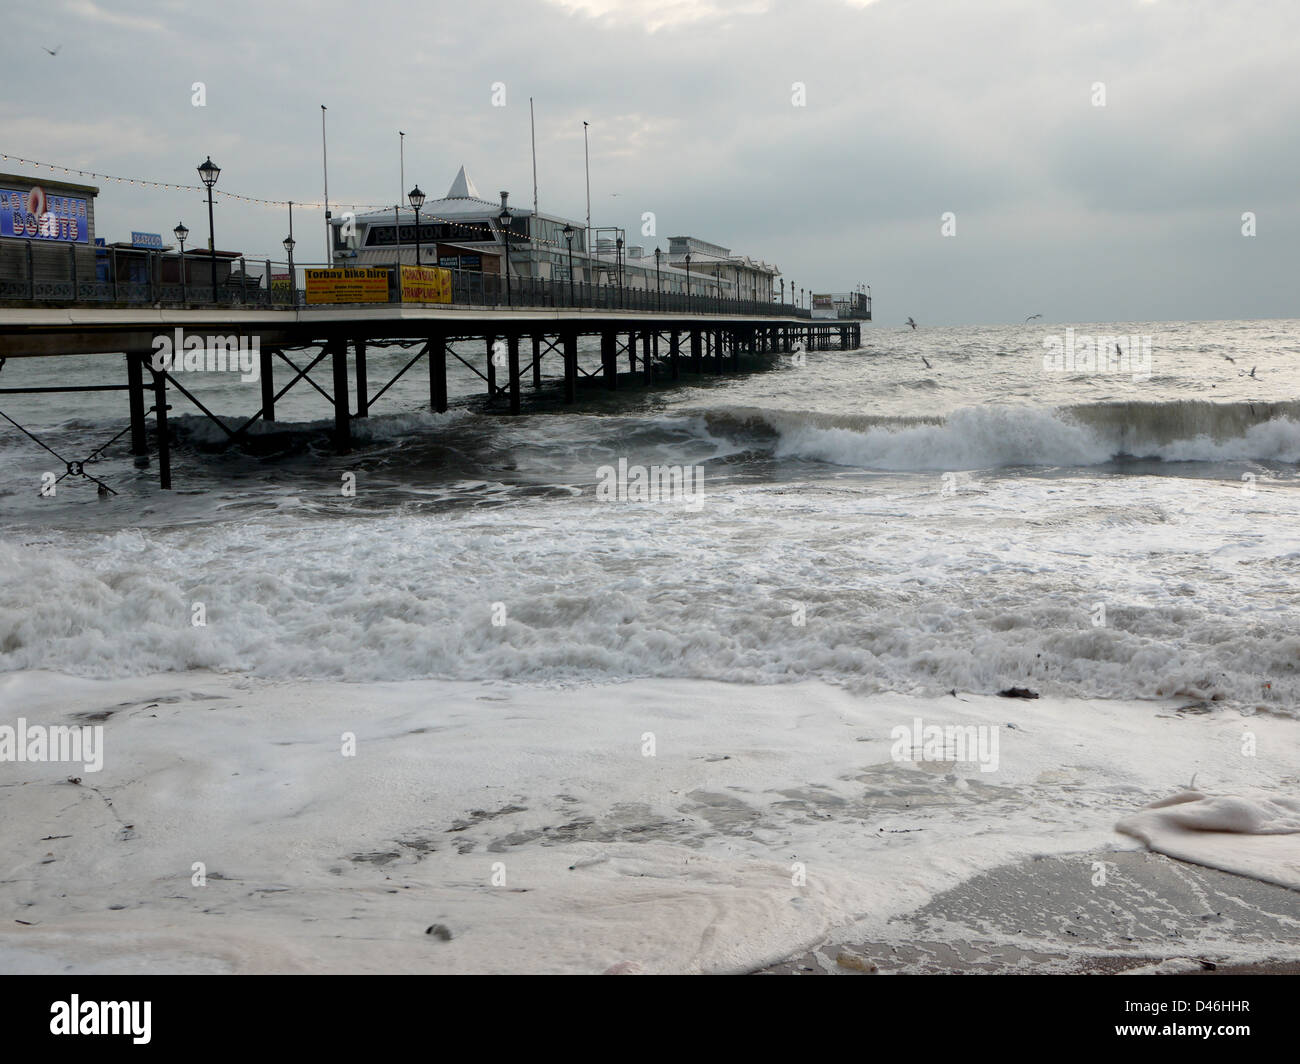 Paignton pier on a stormy day Stock Photo